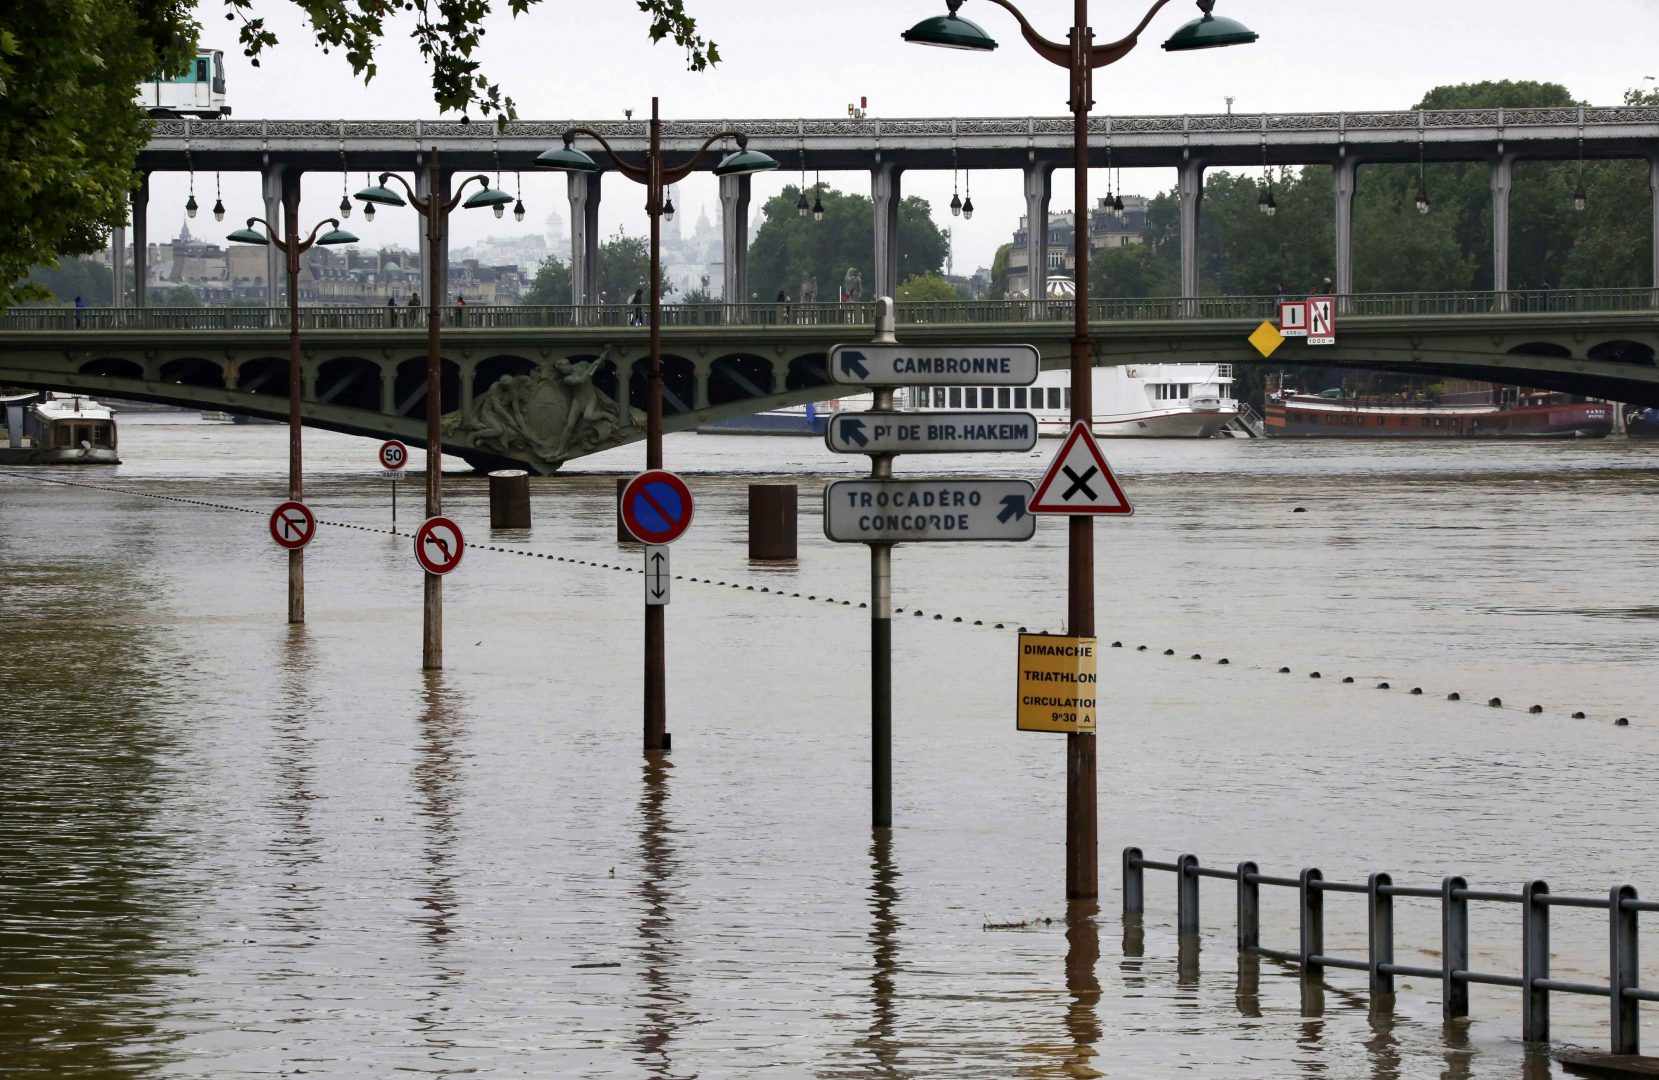 General view of flooding on the banks of the Seine River after days of heavy rainfall in Paris, France, June 2, 2016. REUTERS/Jacky Naegelen